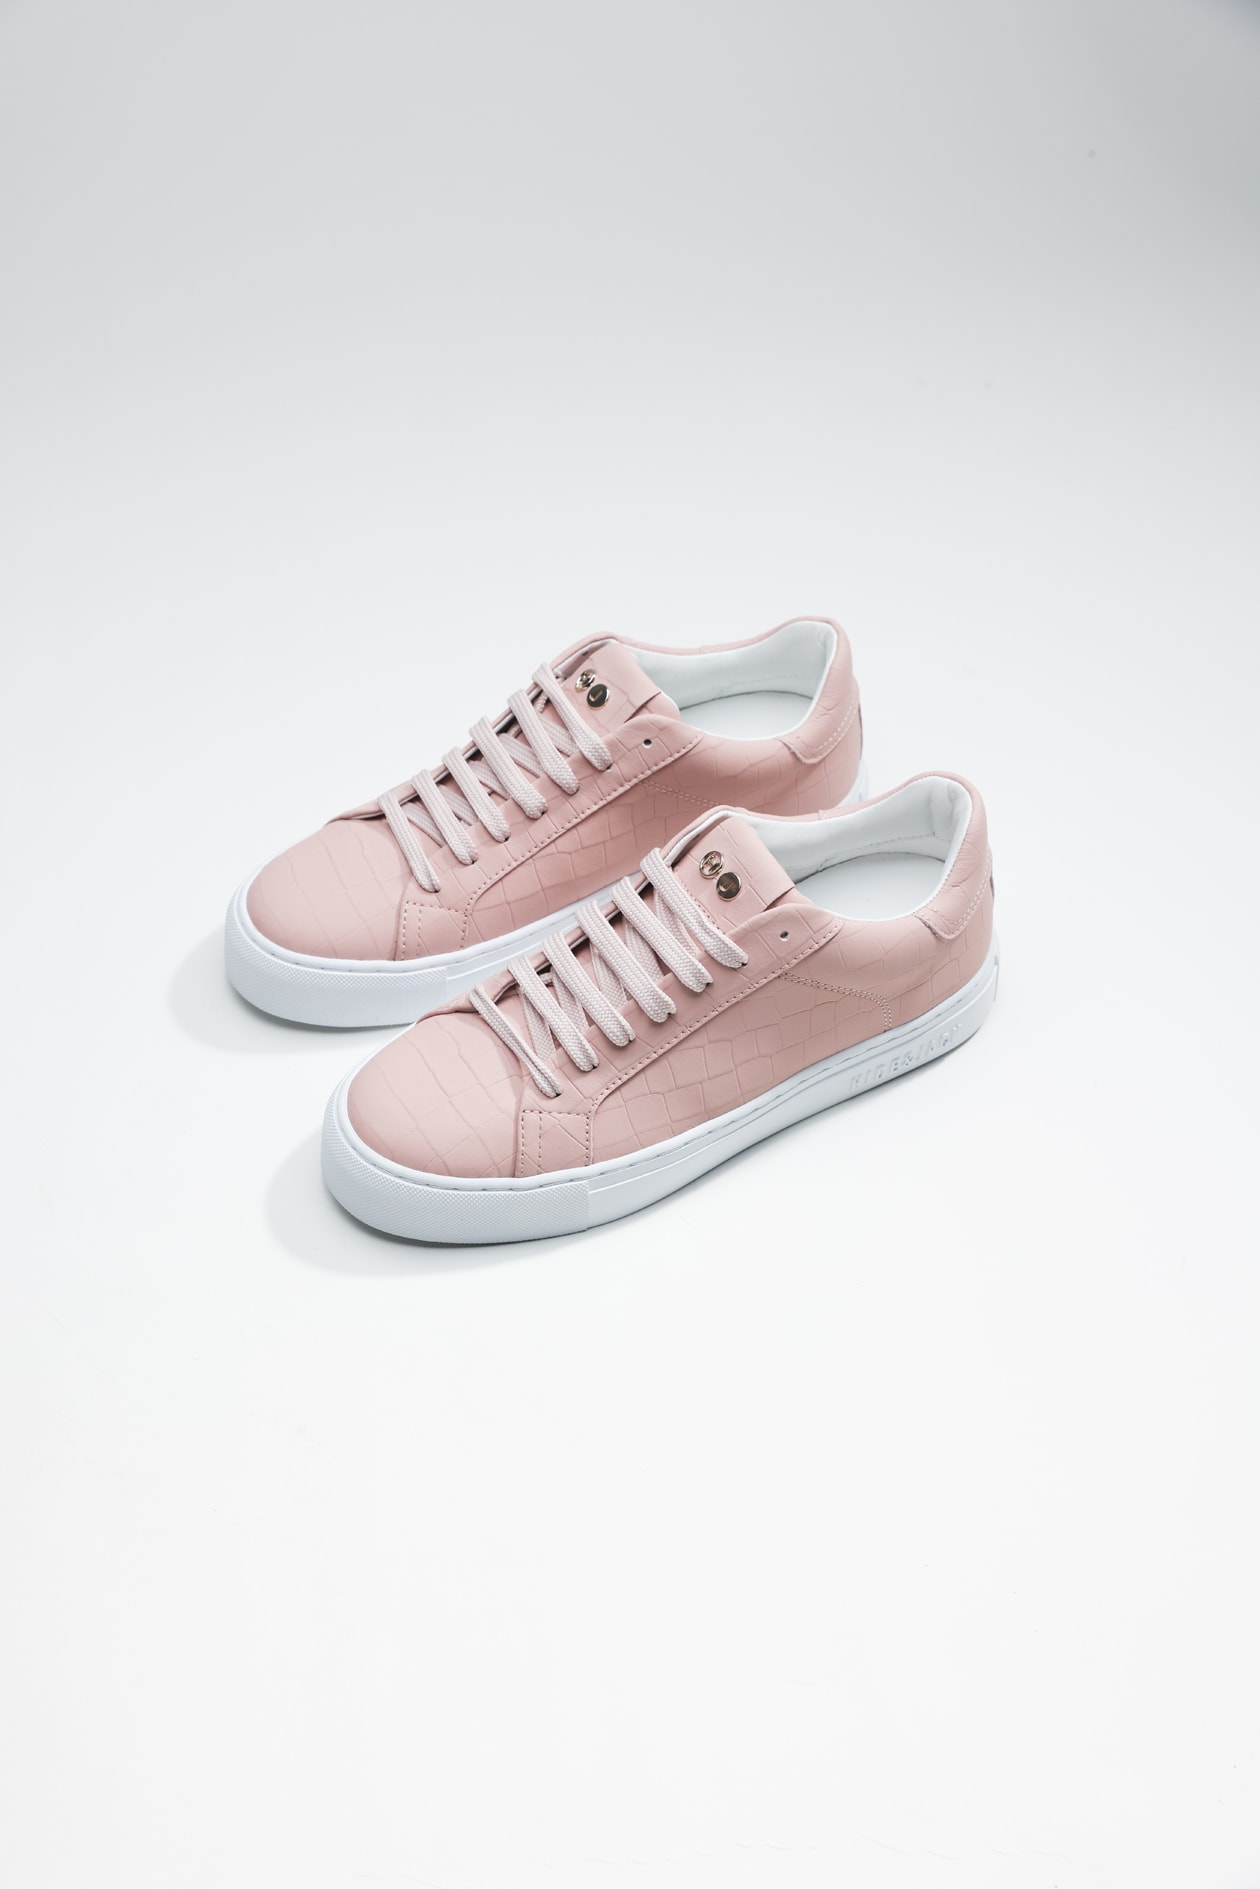 Hide&amp;jack Low Top Trainer - Essence Pink White